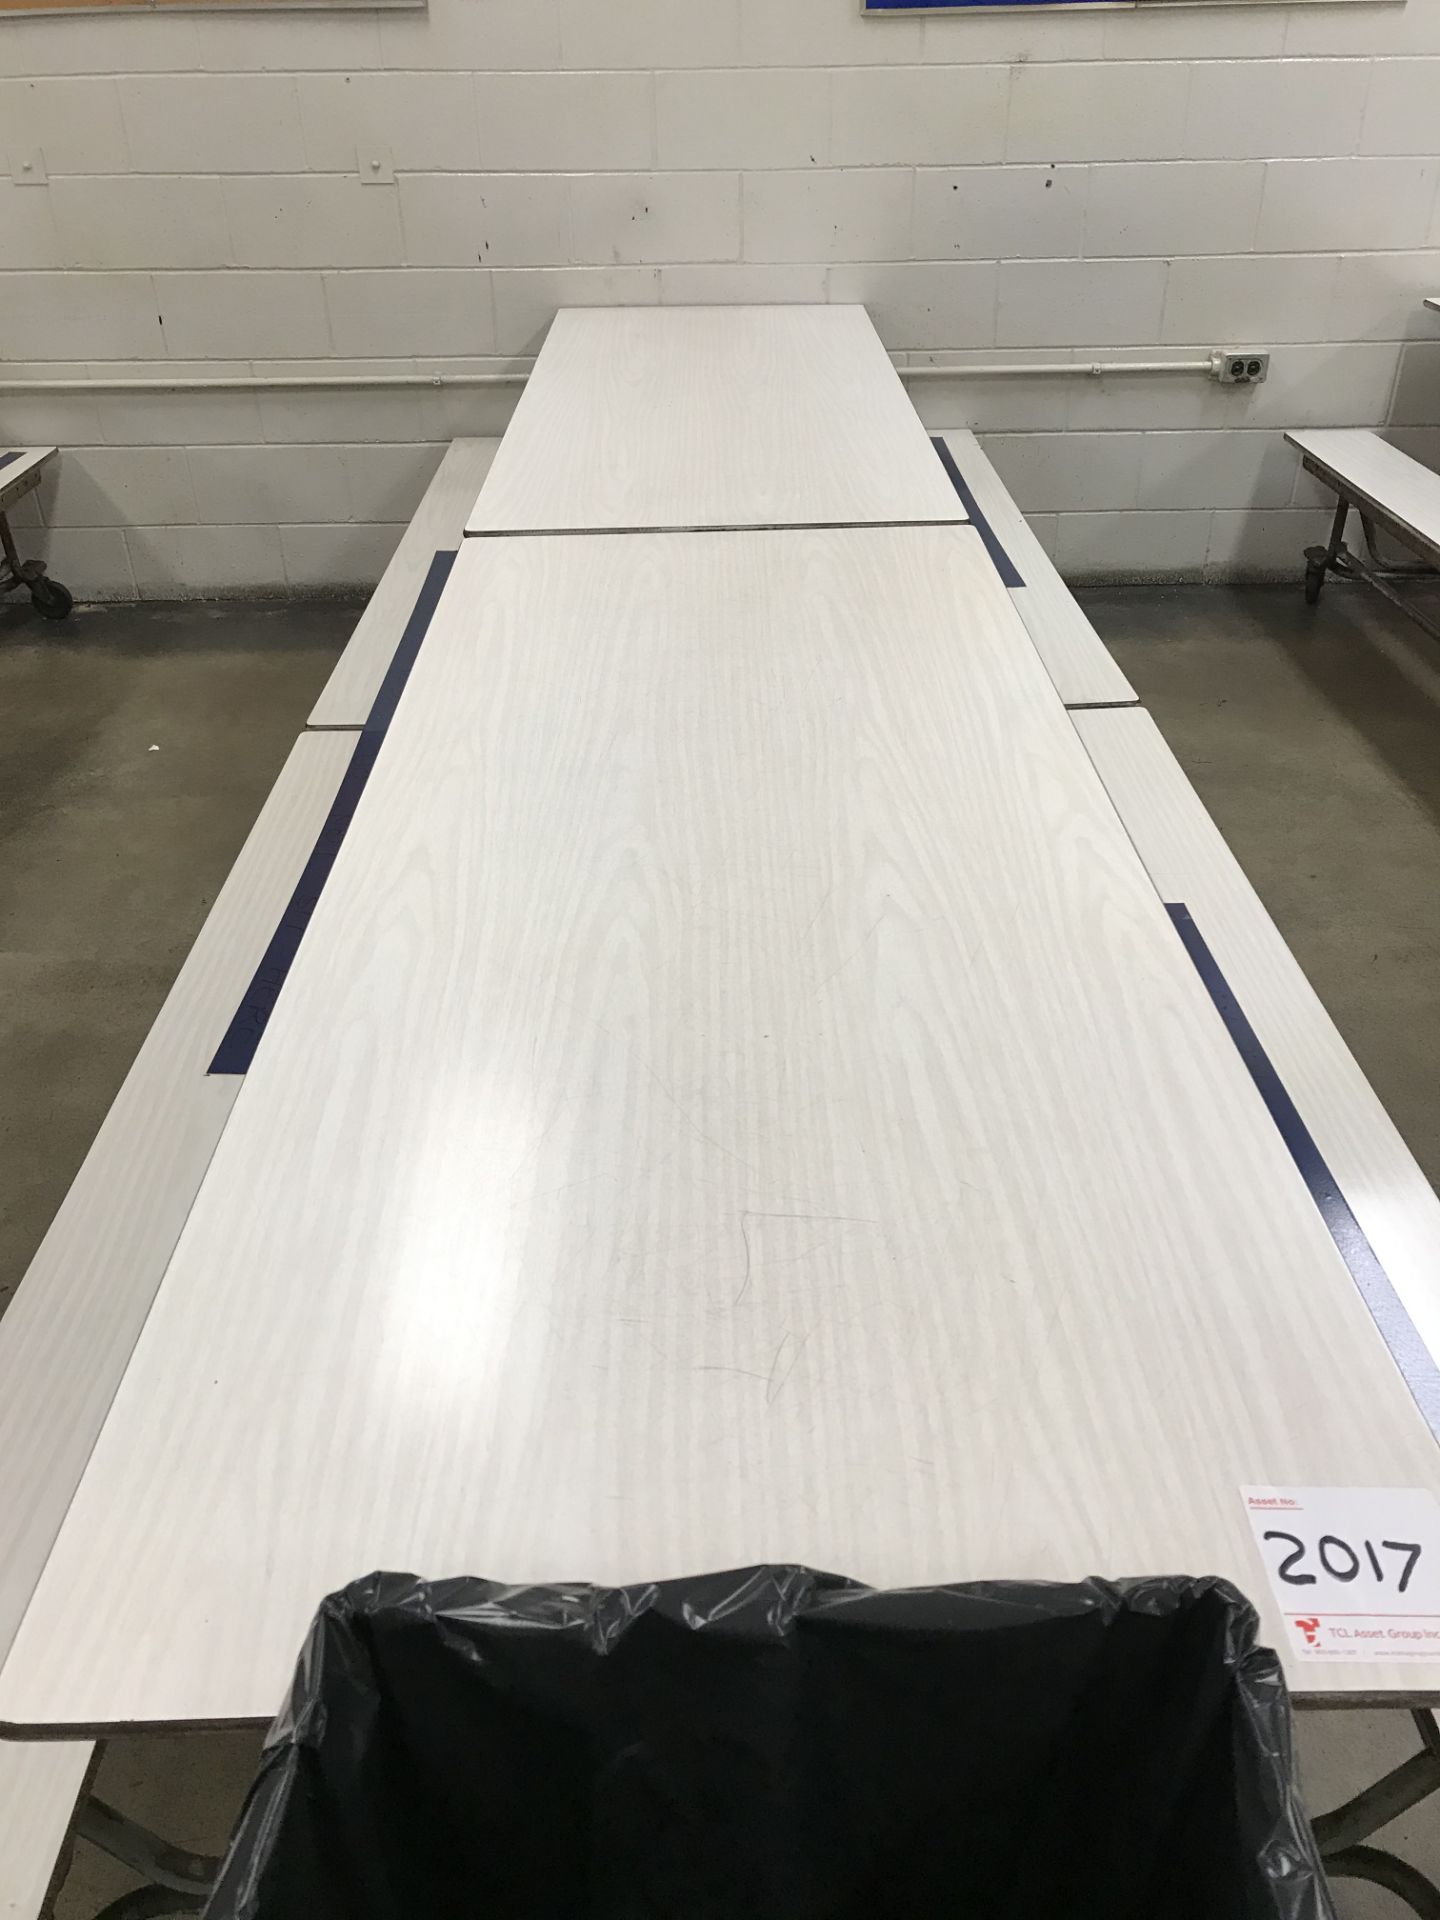 CAFETERIA TABLE & BENCH, Approx. 144 X 29 X 29 in.